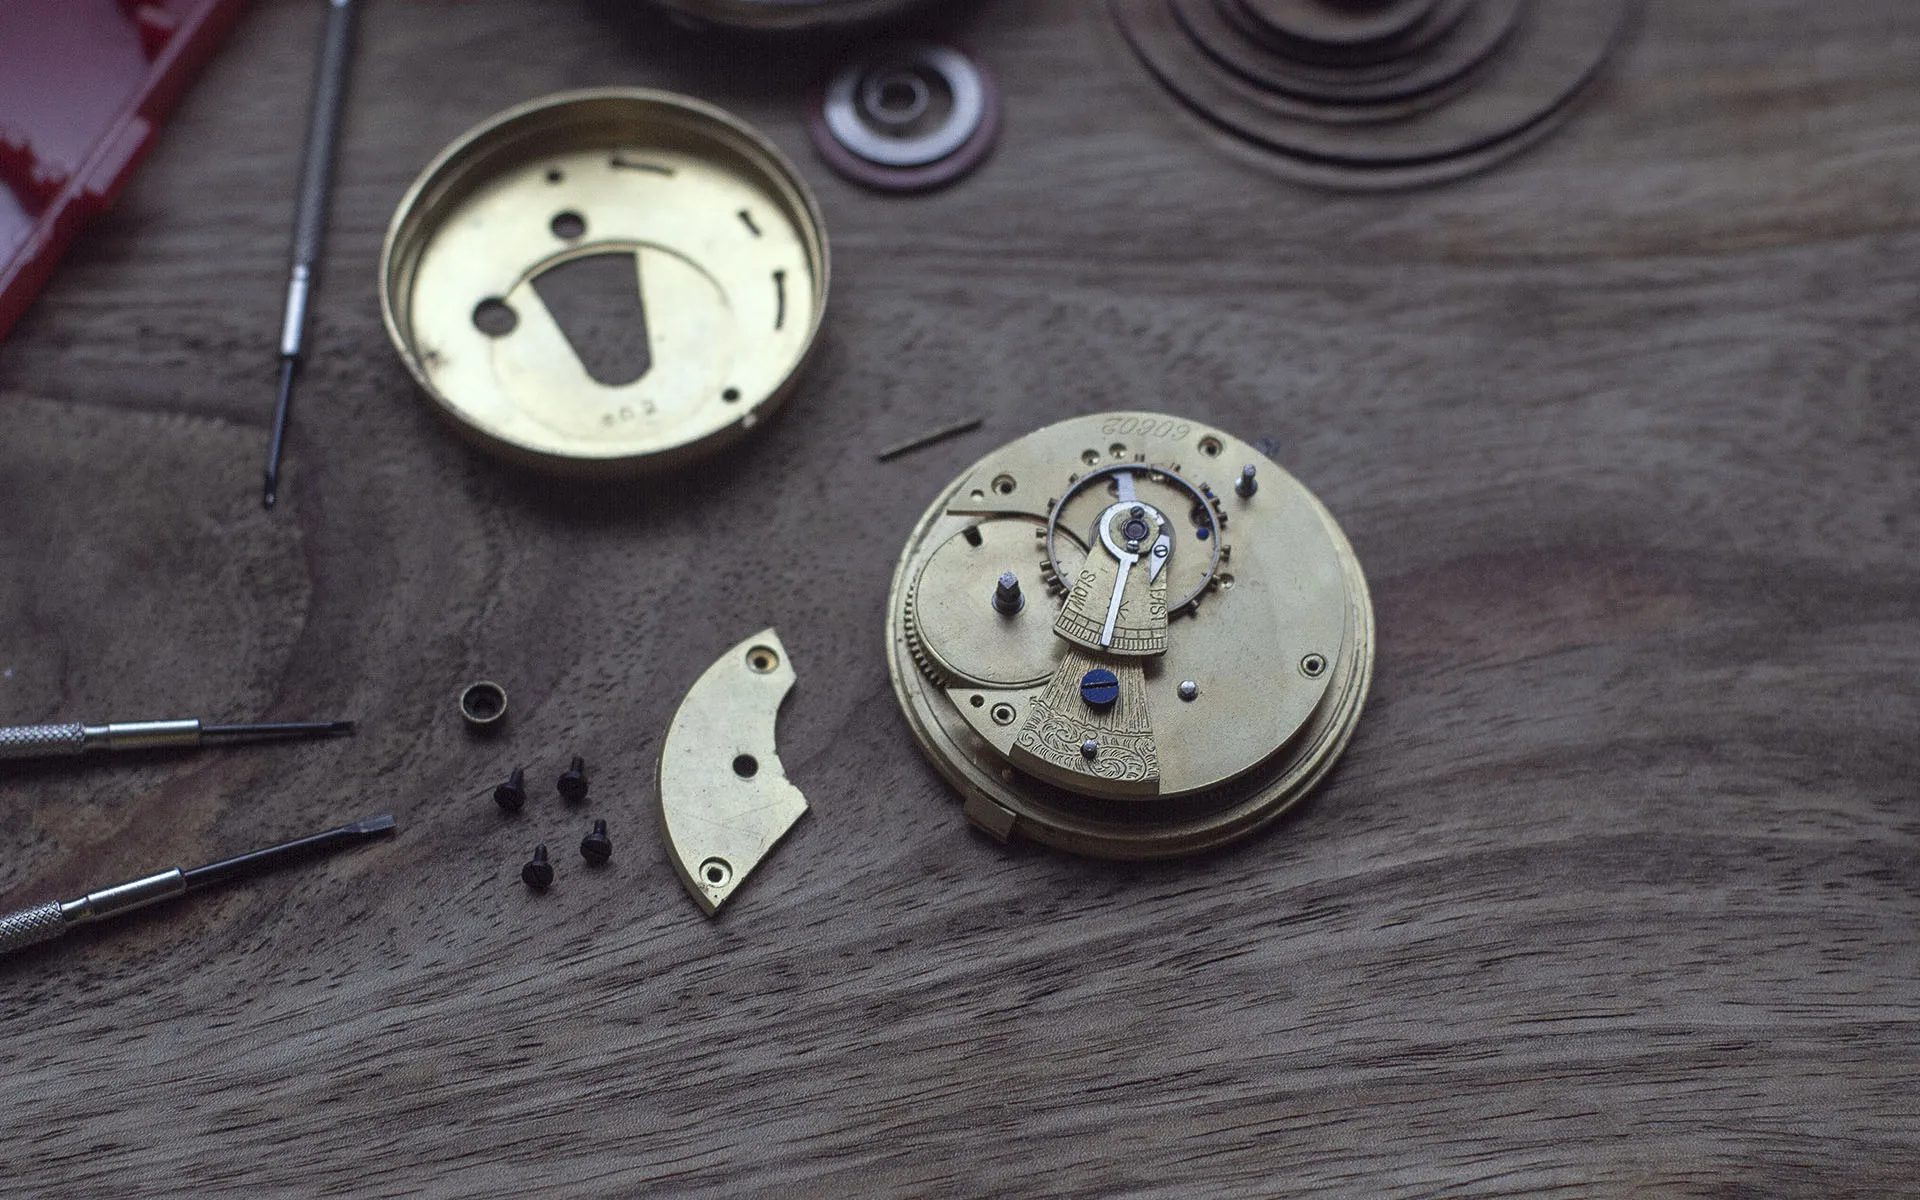 Mechanical watch mechanism with backplate removed, gears showing.